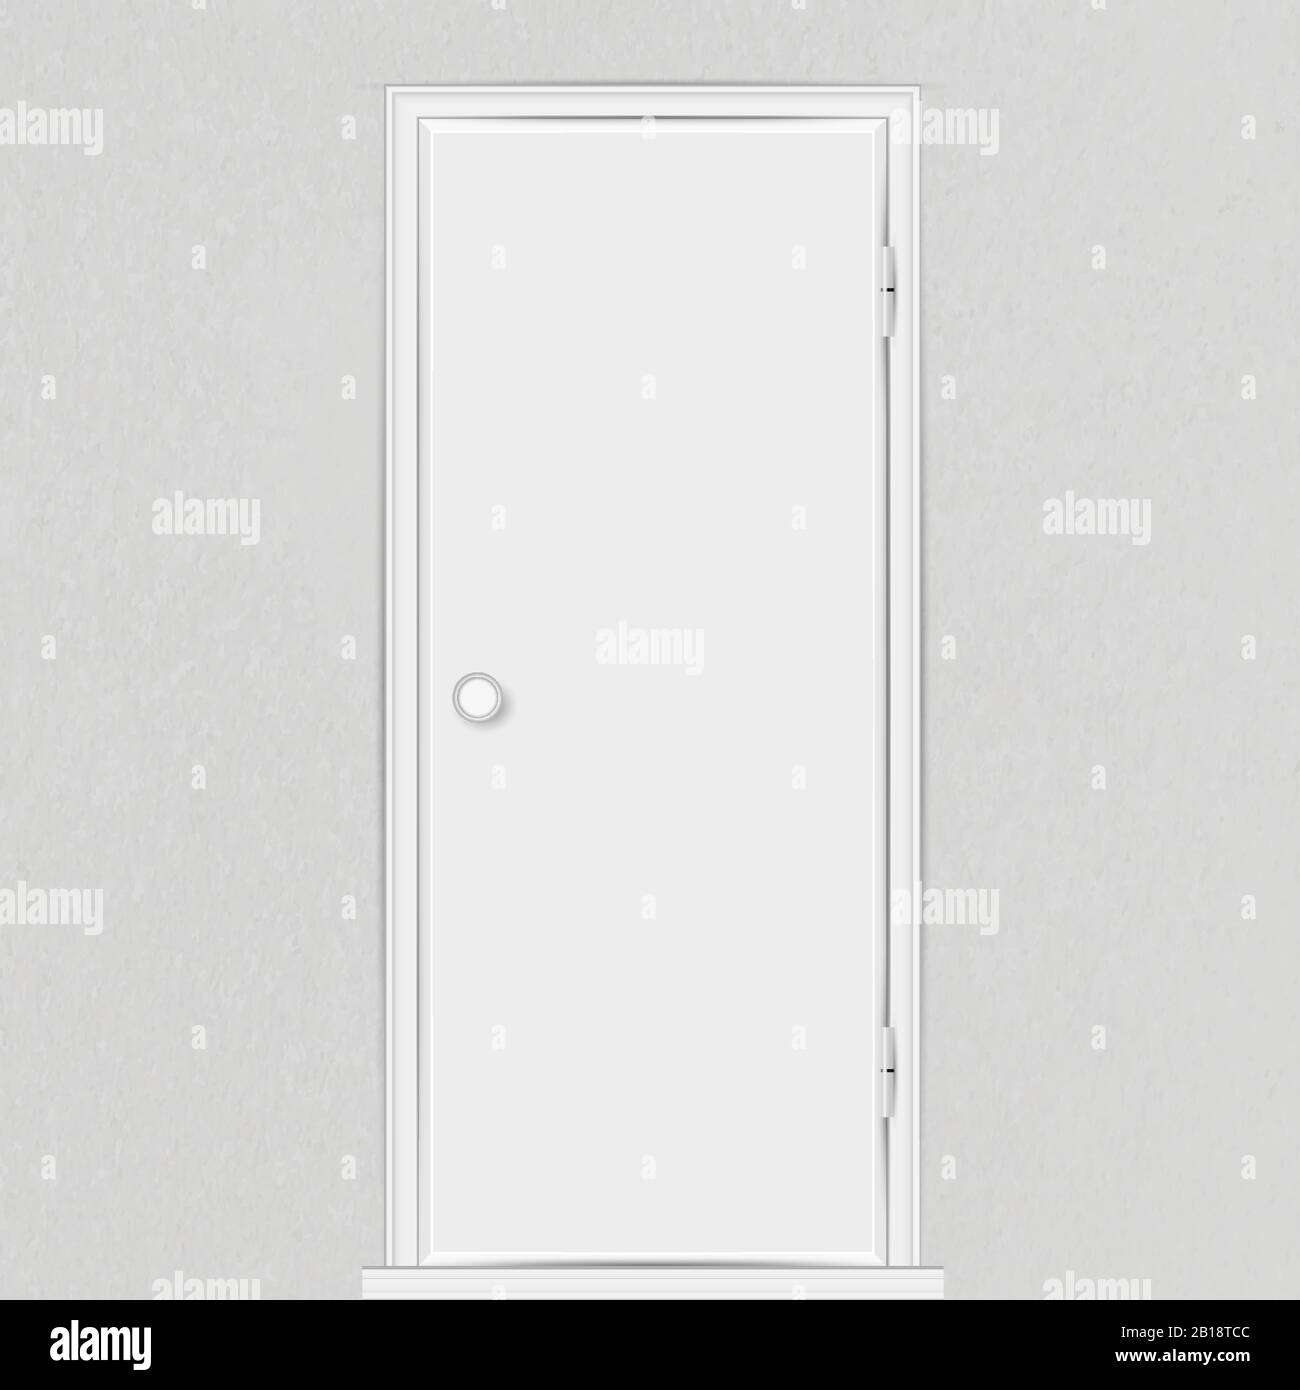 Realistic empty white closed door with frame and doorknob isolated on textured grey wall background. Vector illustration. Stock Vector